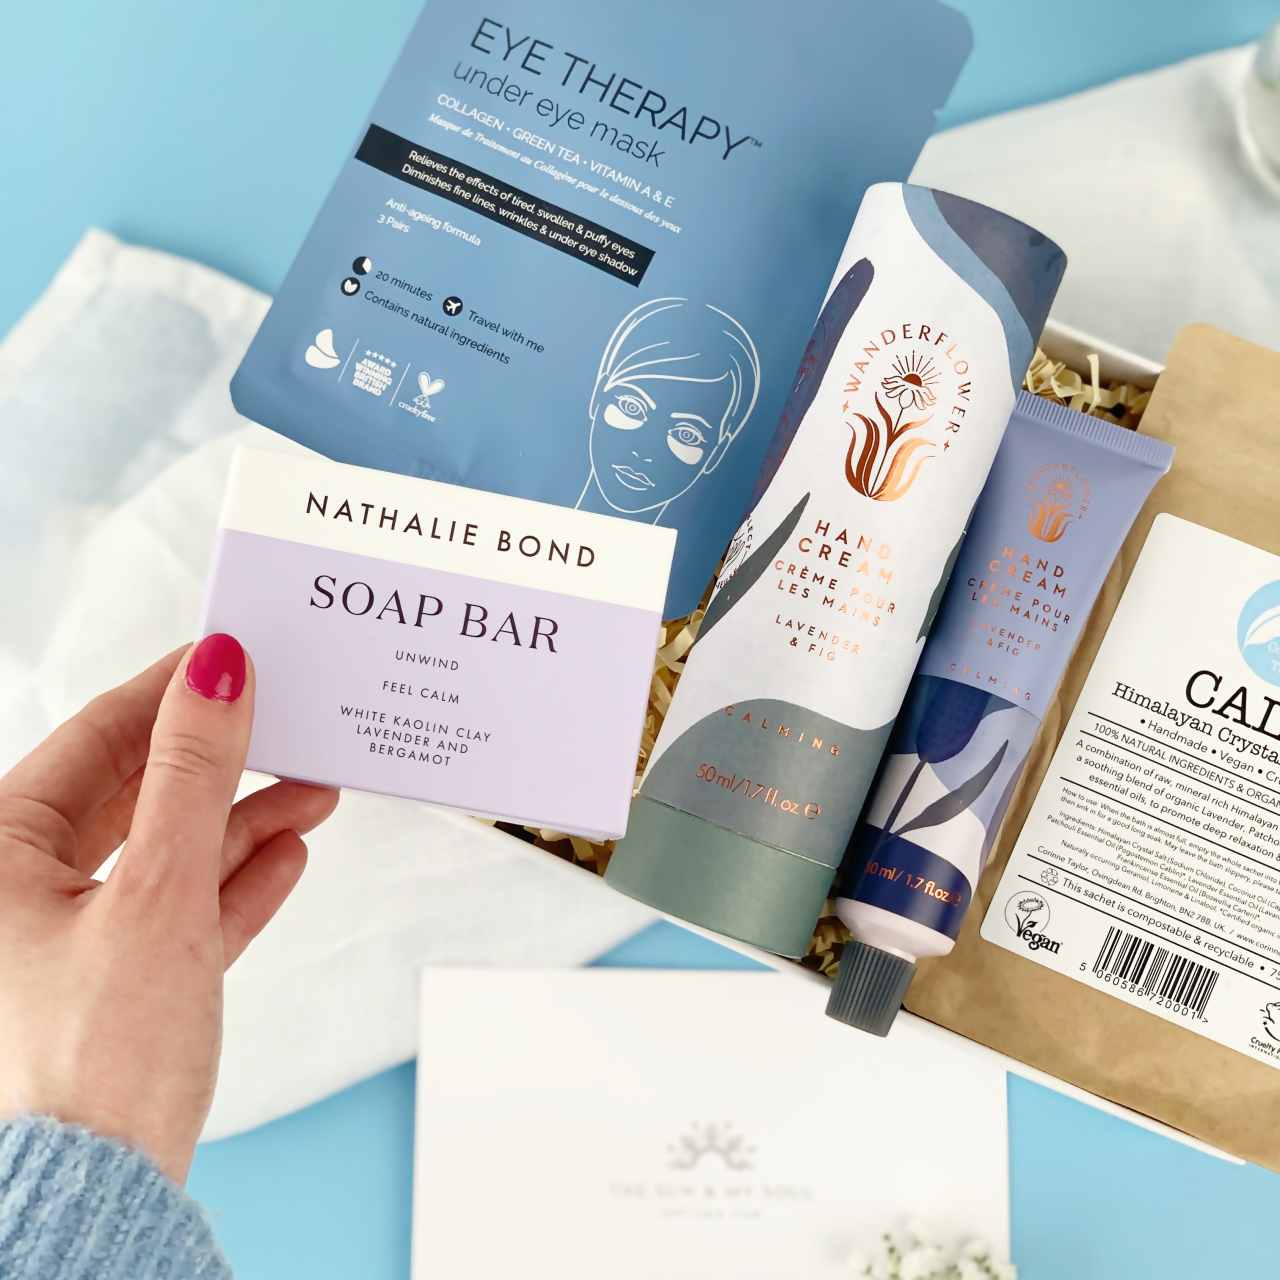 Relax Self-care Gift Box